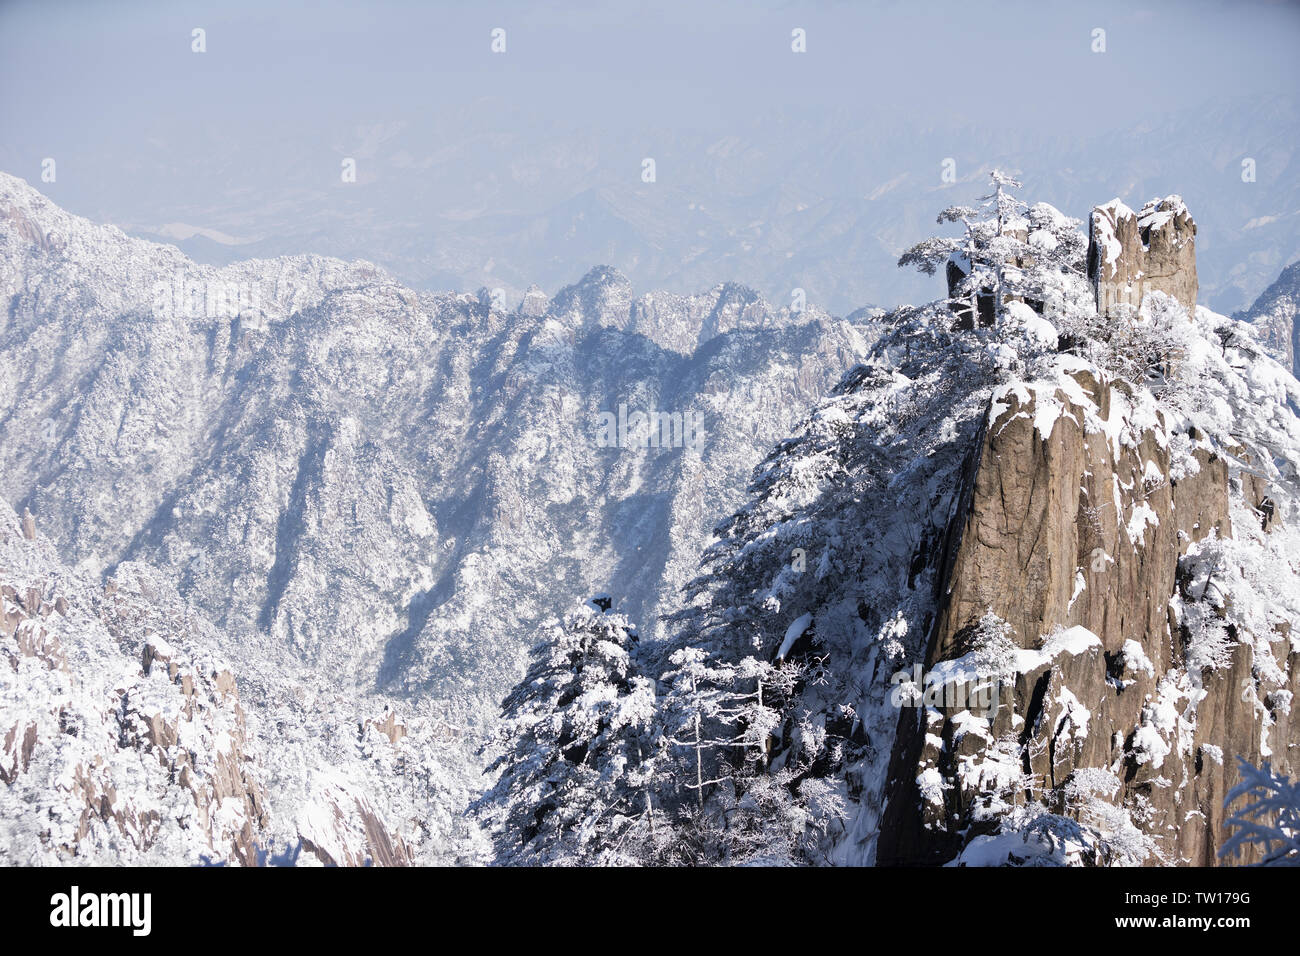 Snow scene of Huangshan hill in Winter Stock Photo